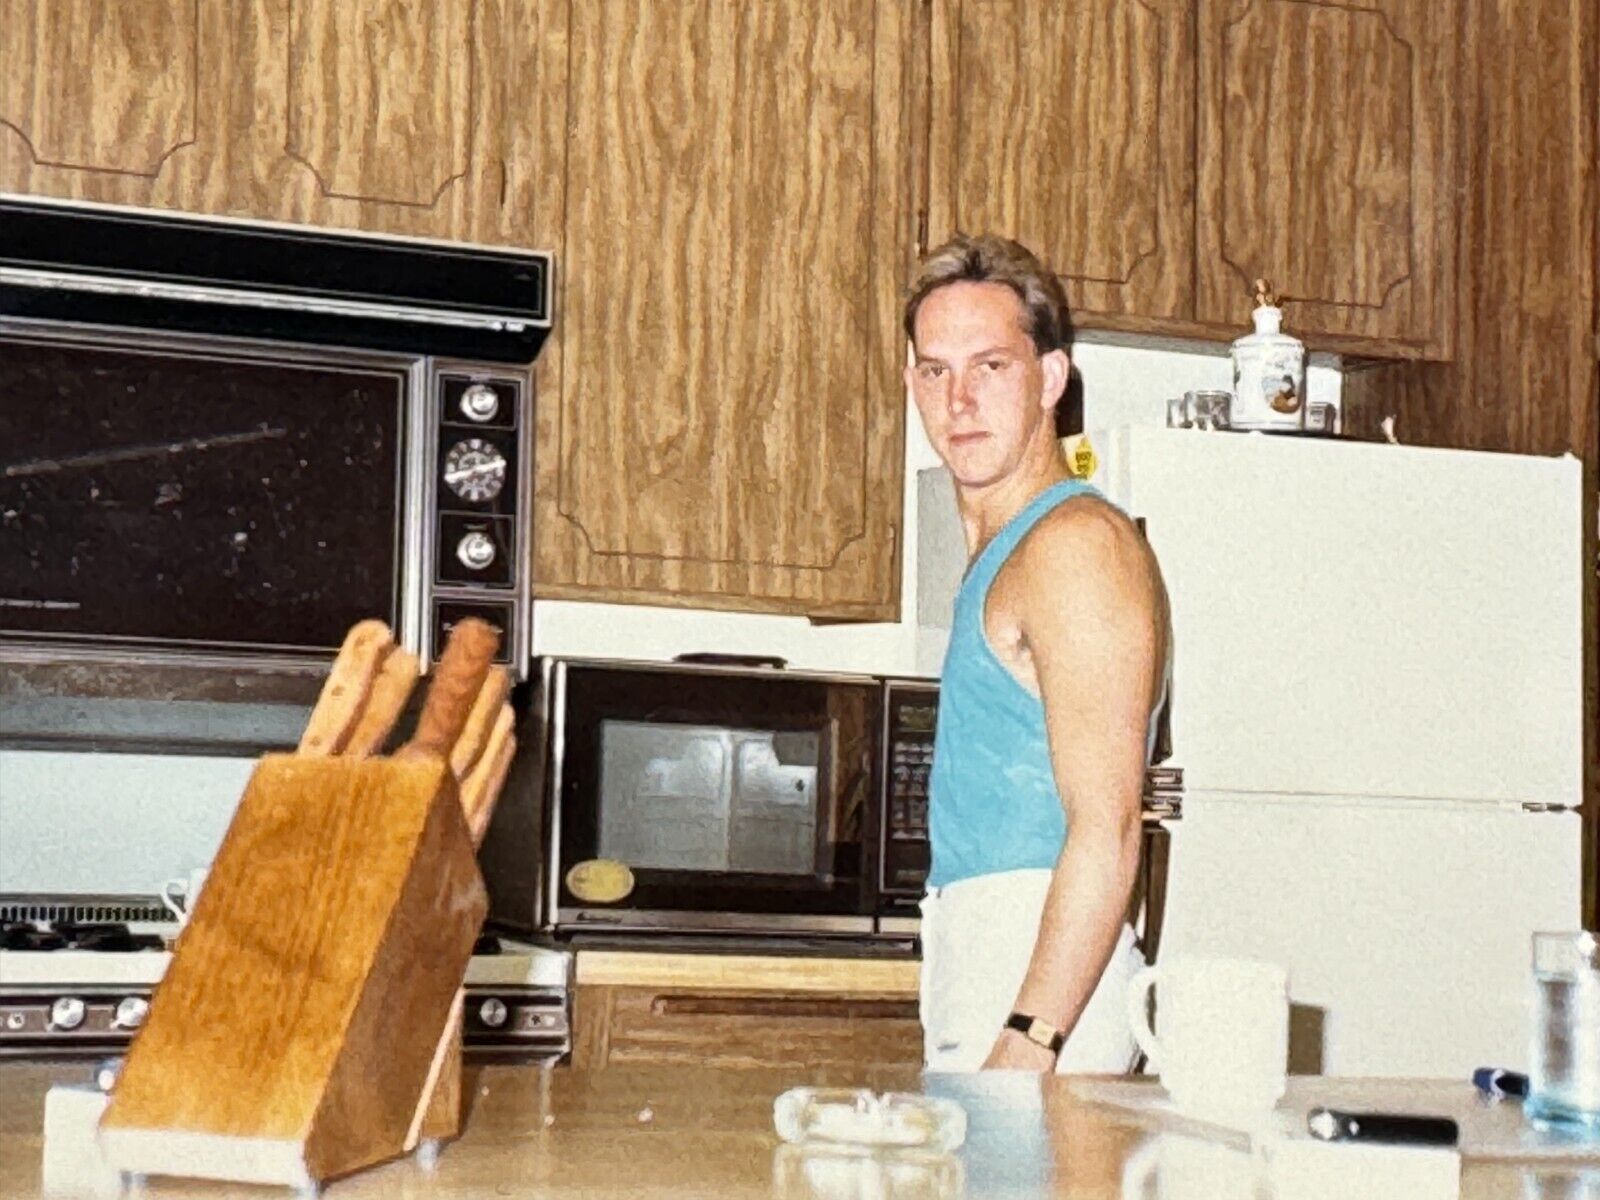 2A Photograph Handsome Man Candid Snapshot Tank Top Kitchen 1980's